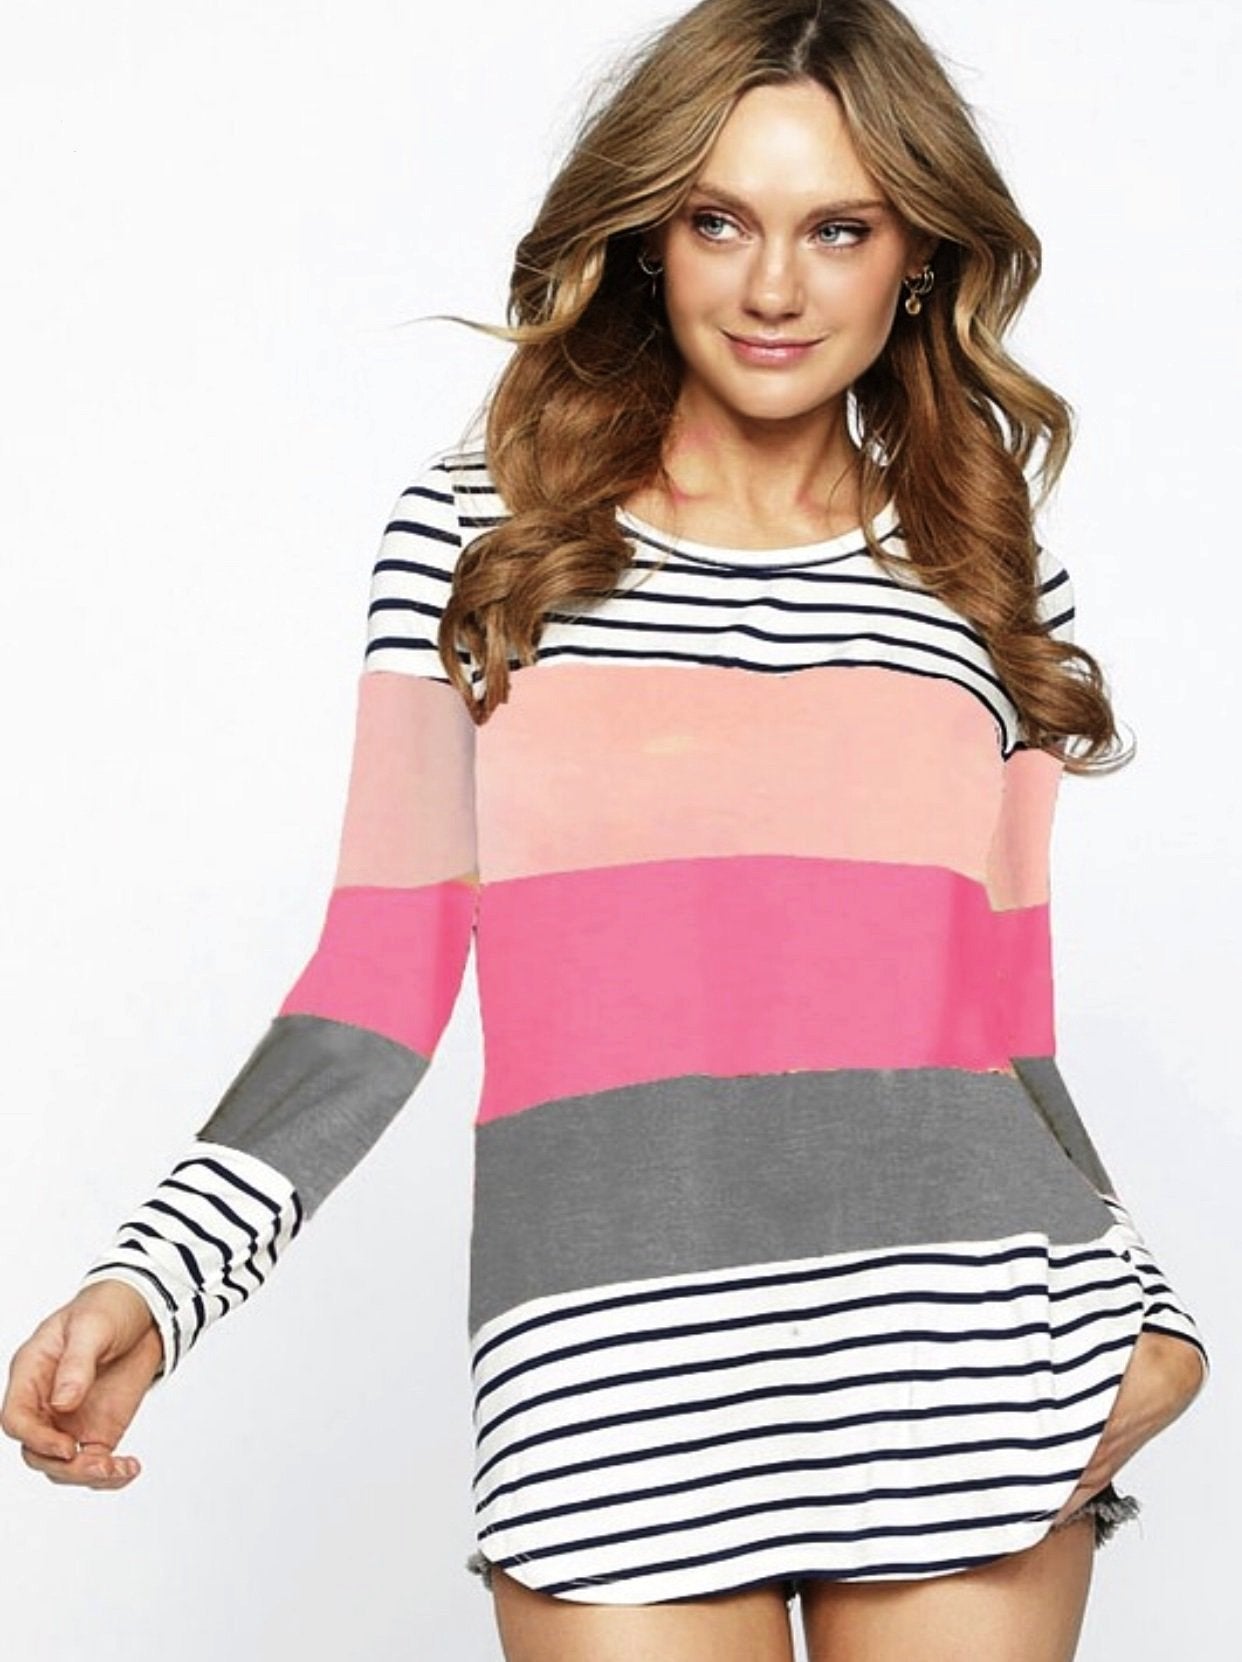 Blush/Pink/Grey Top With Black and White Stripes